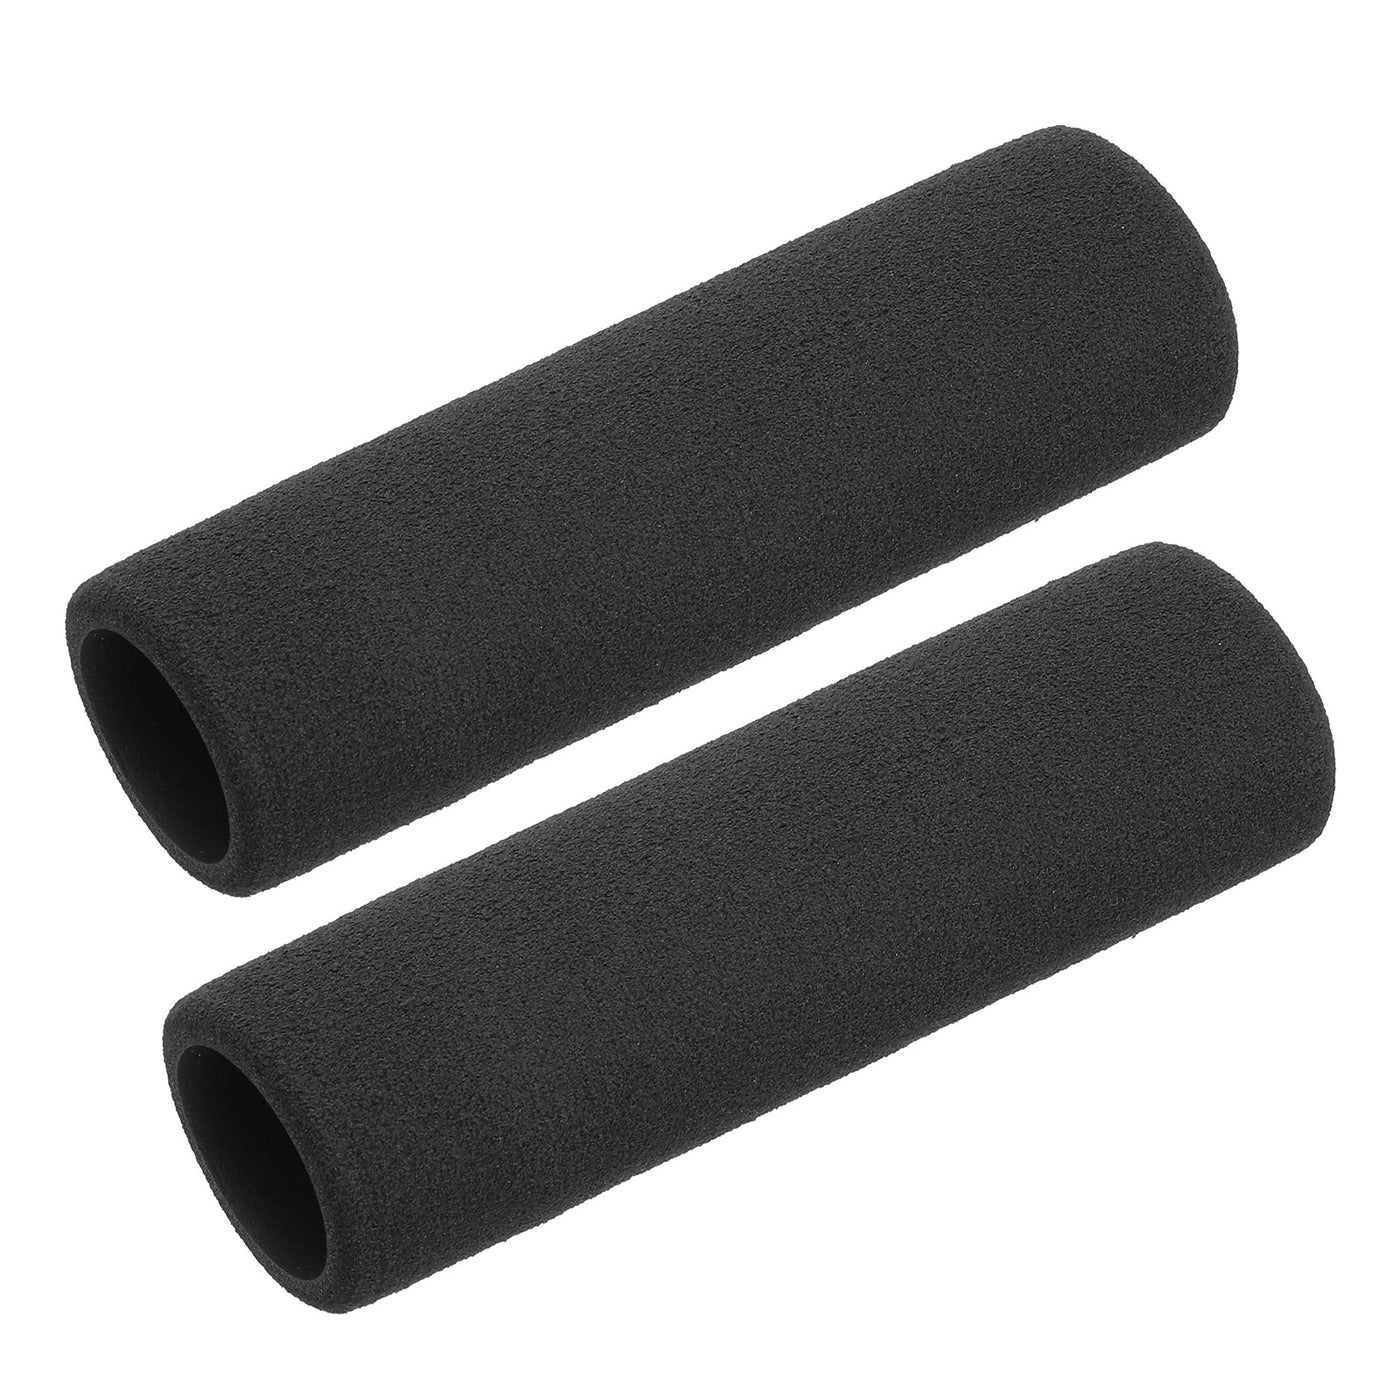 uxcell Uxcell Pipe Insulation Tube Foam Tubing for Handle Grip Support 24mm ID 34mm OD 108mm Heat Preservation Black 2pcs